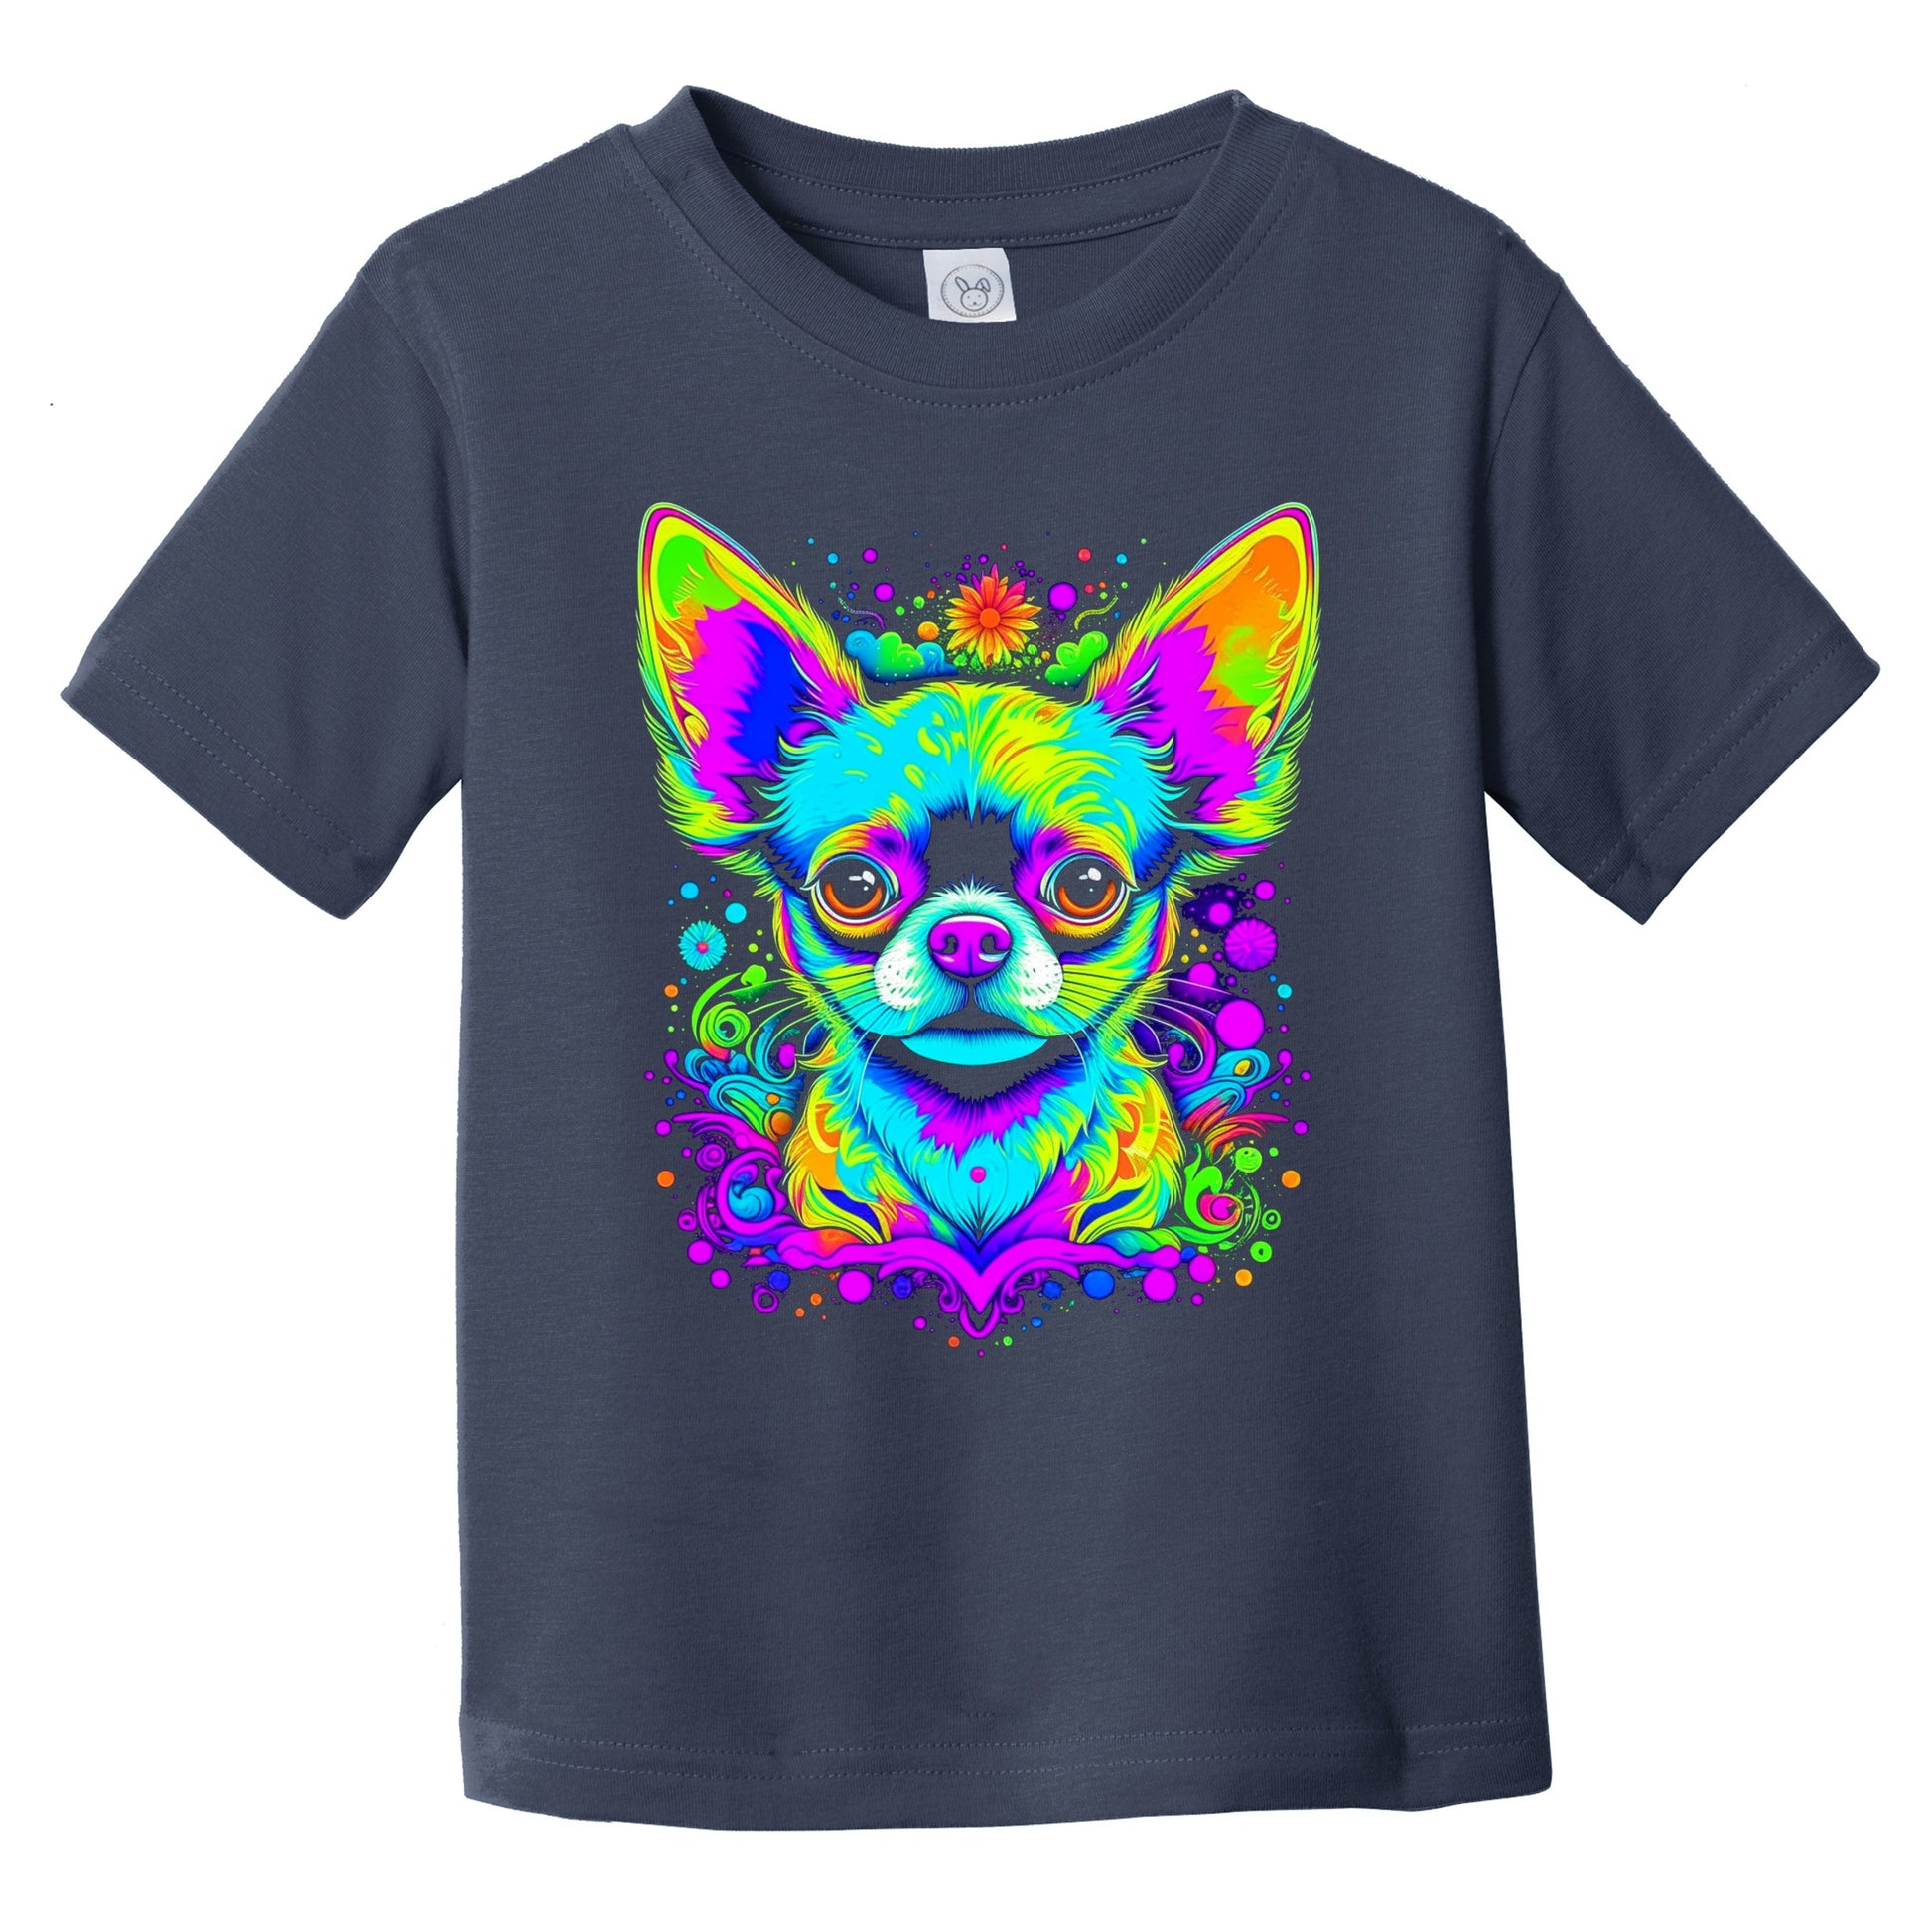 Colorful Bright Chihuahua Vibrant Psychedelic Dog Art Infant Toddler T-Shirt